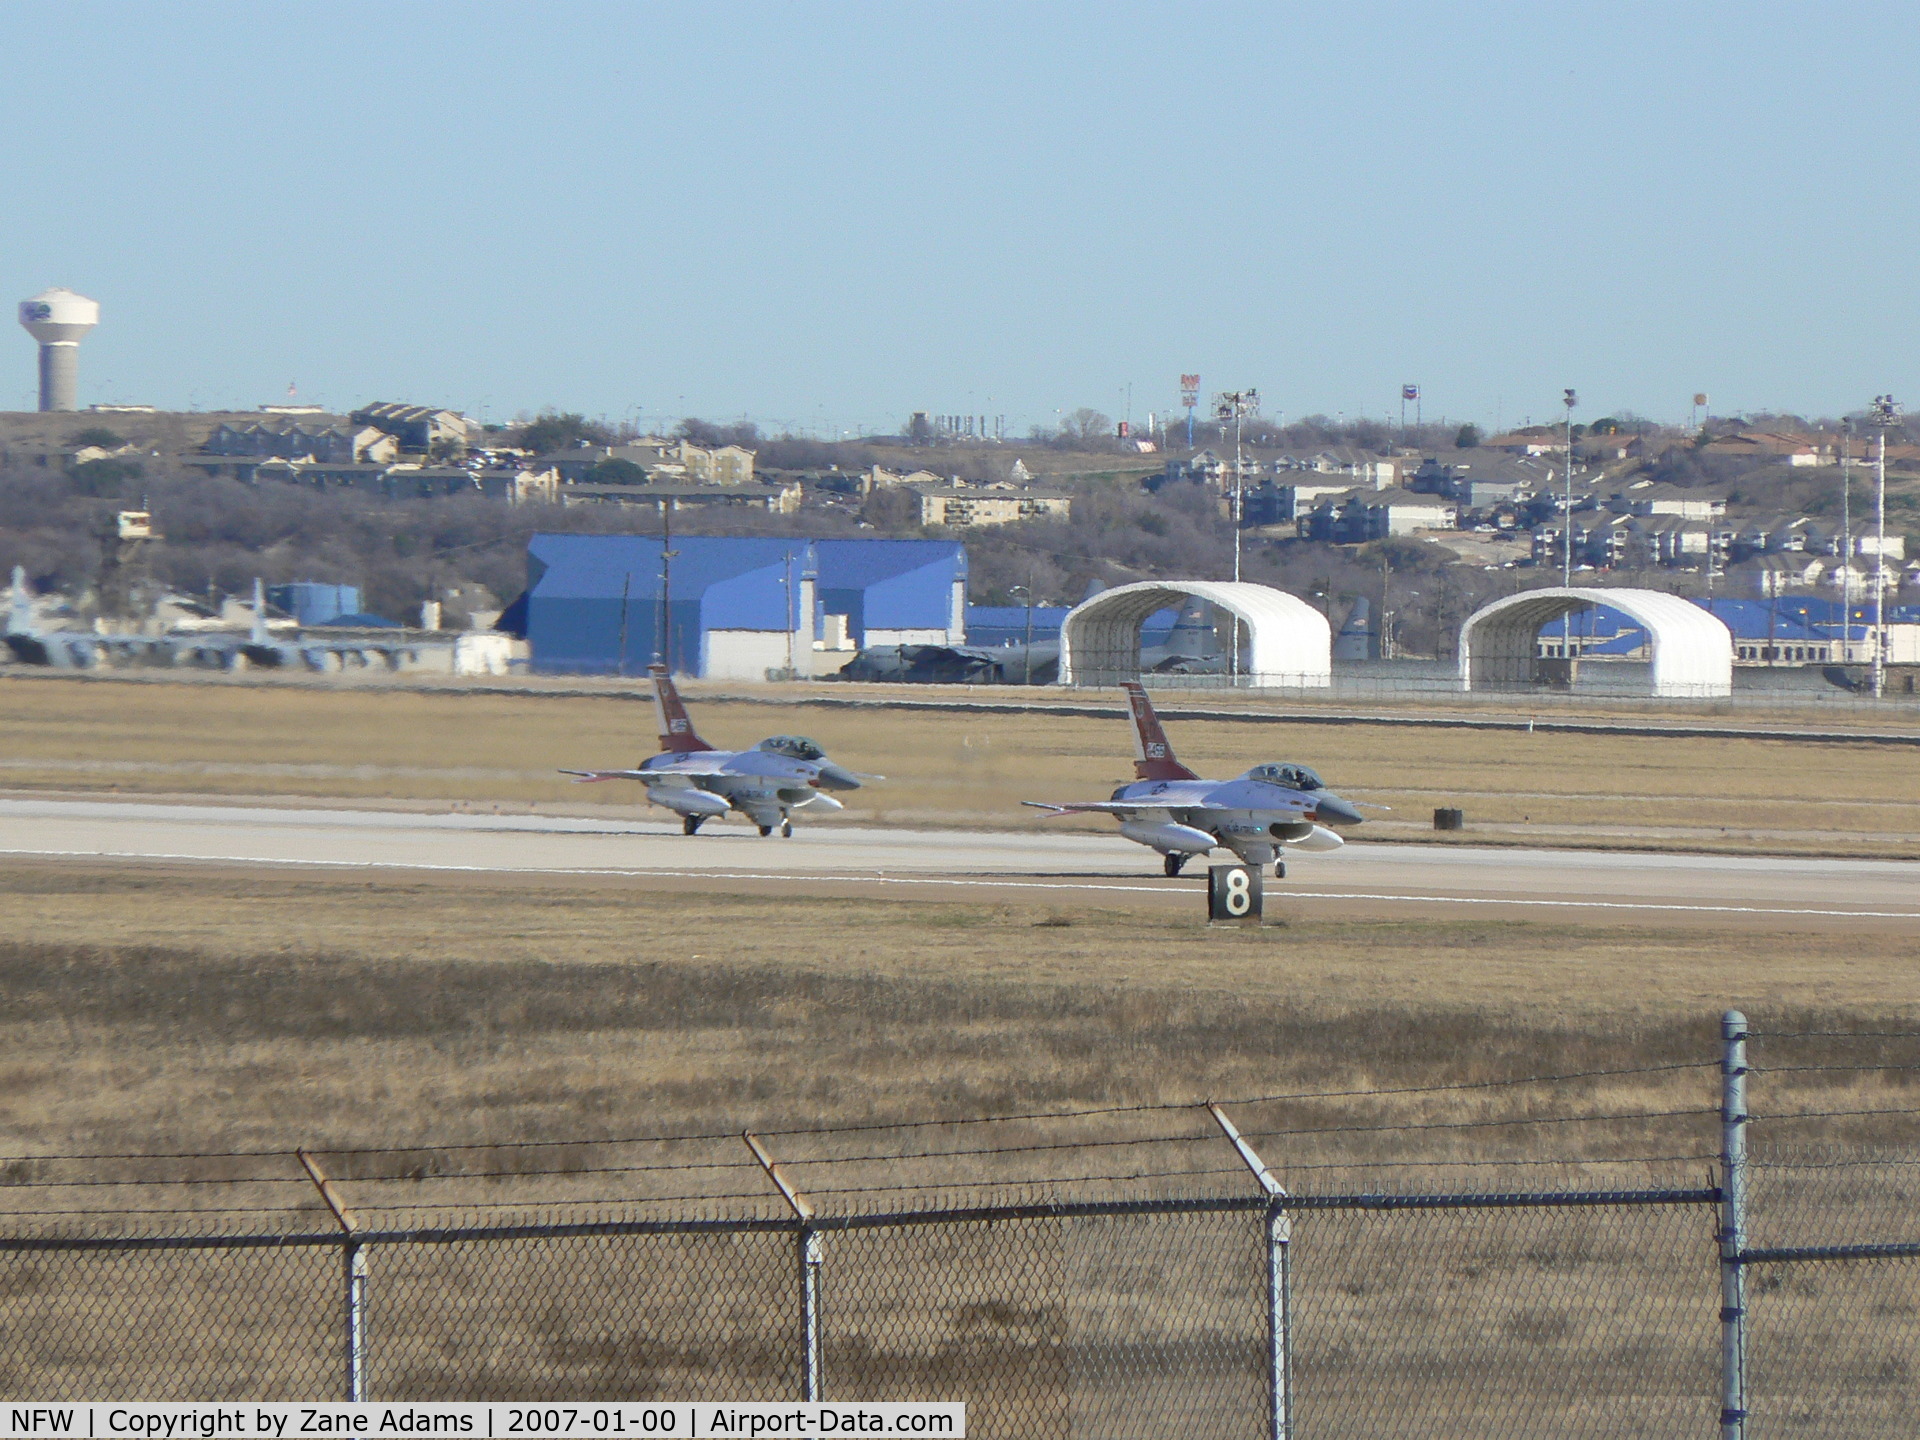 Fort Worth Nas Jrb/carswell Field Airport (NFW) - Two chase aircraft from Edwards AFB in town for F-35 flight test. - 92-0455 and 92-0456